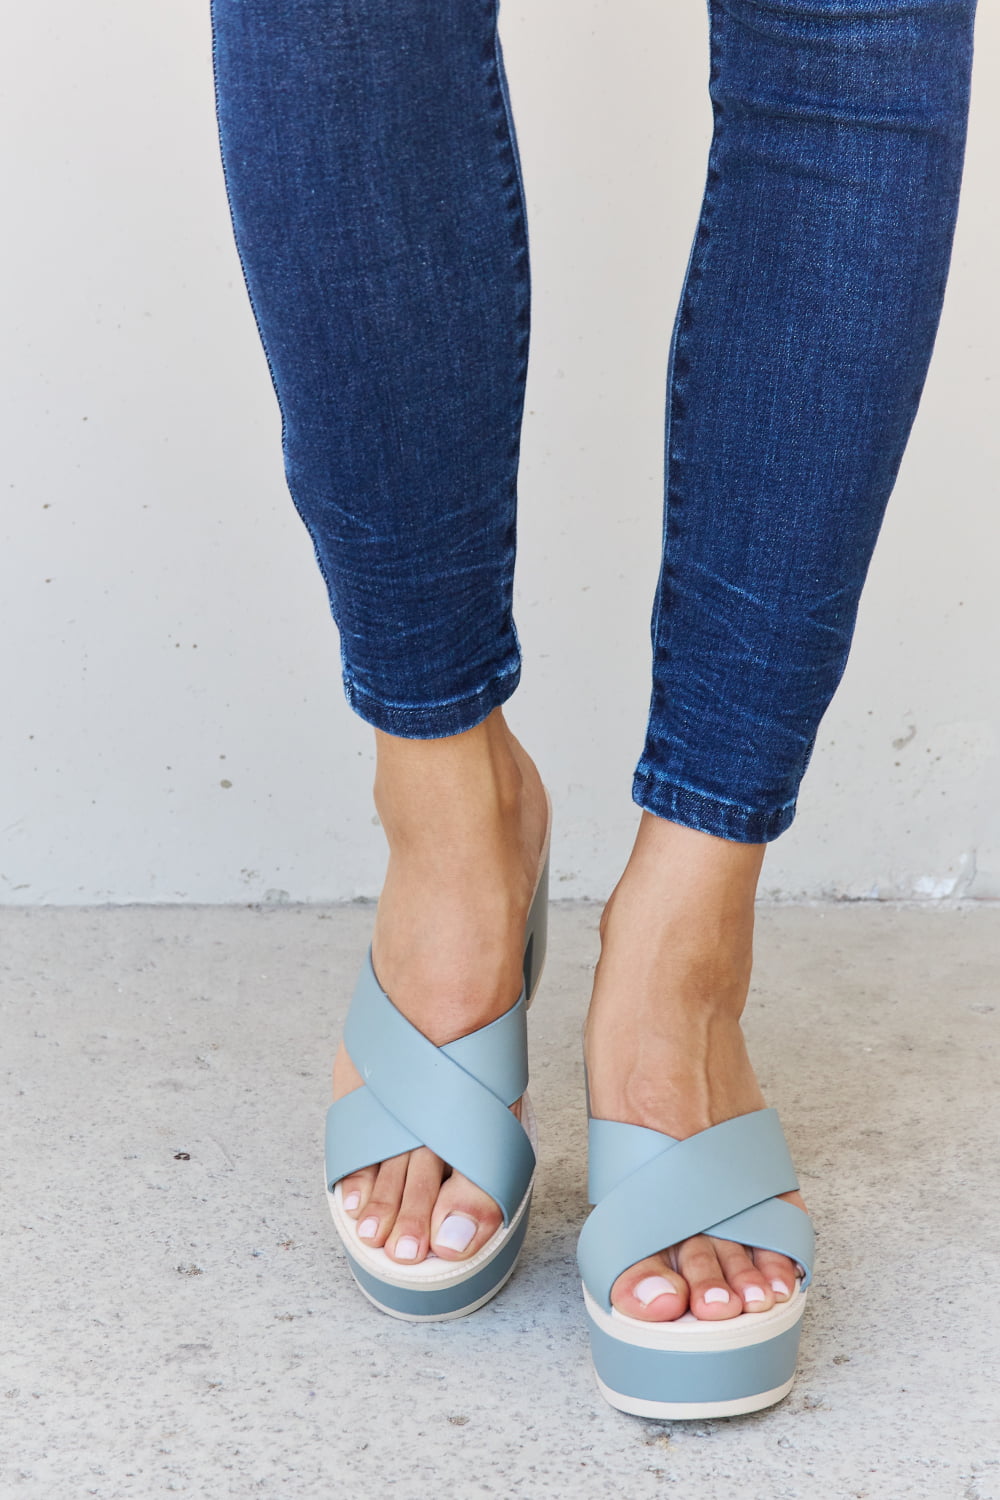 Weeboo Cherish The Moments Contrast Platform Sandals in Misty Blue Print on any thing USA/STOD clothes